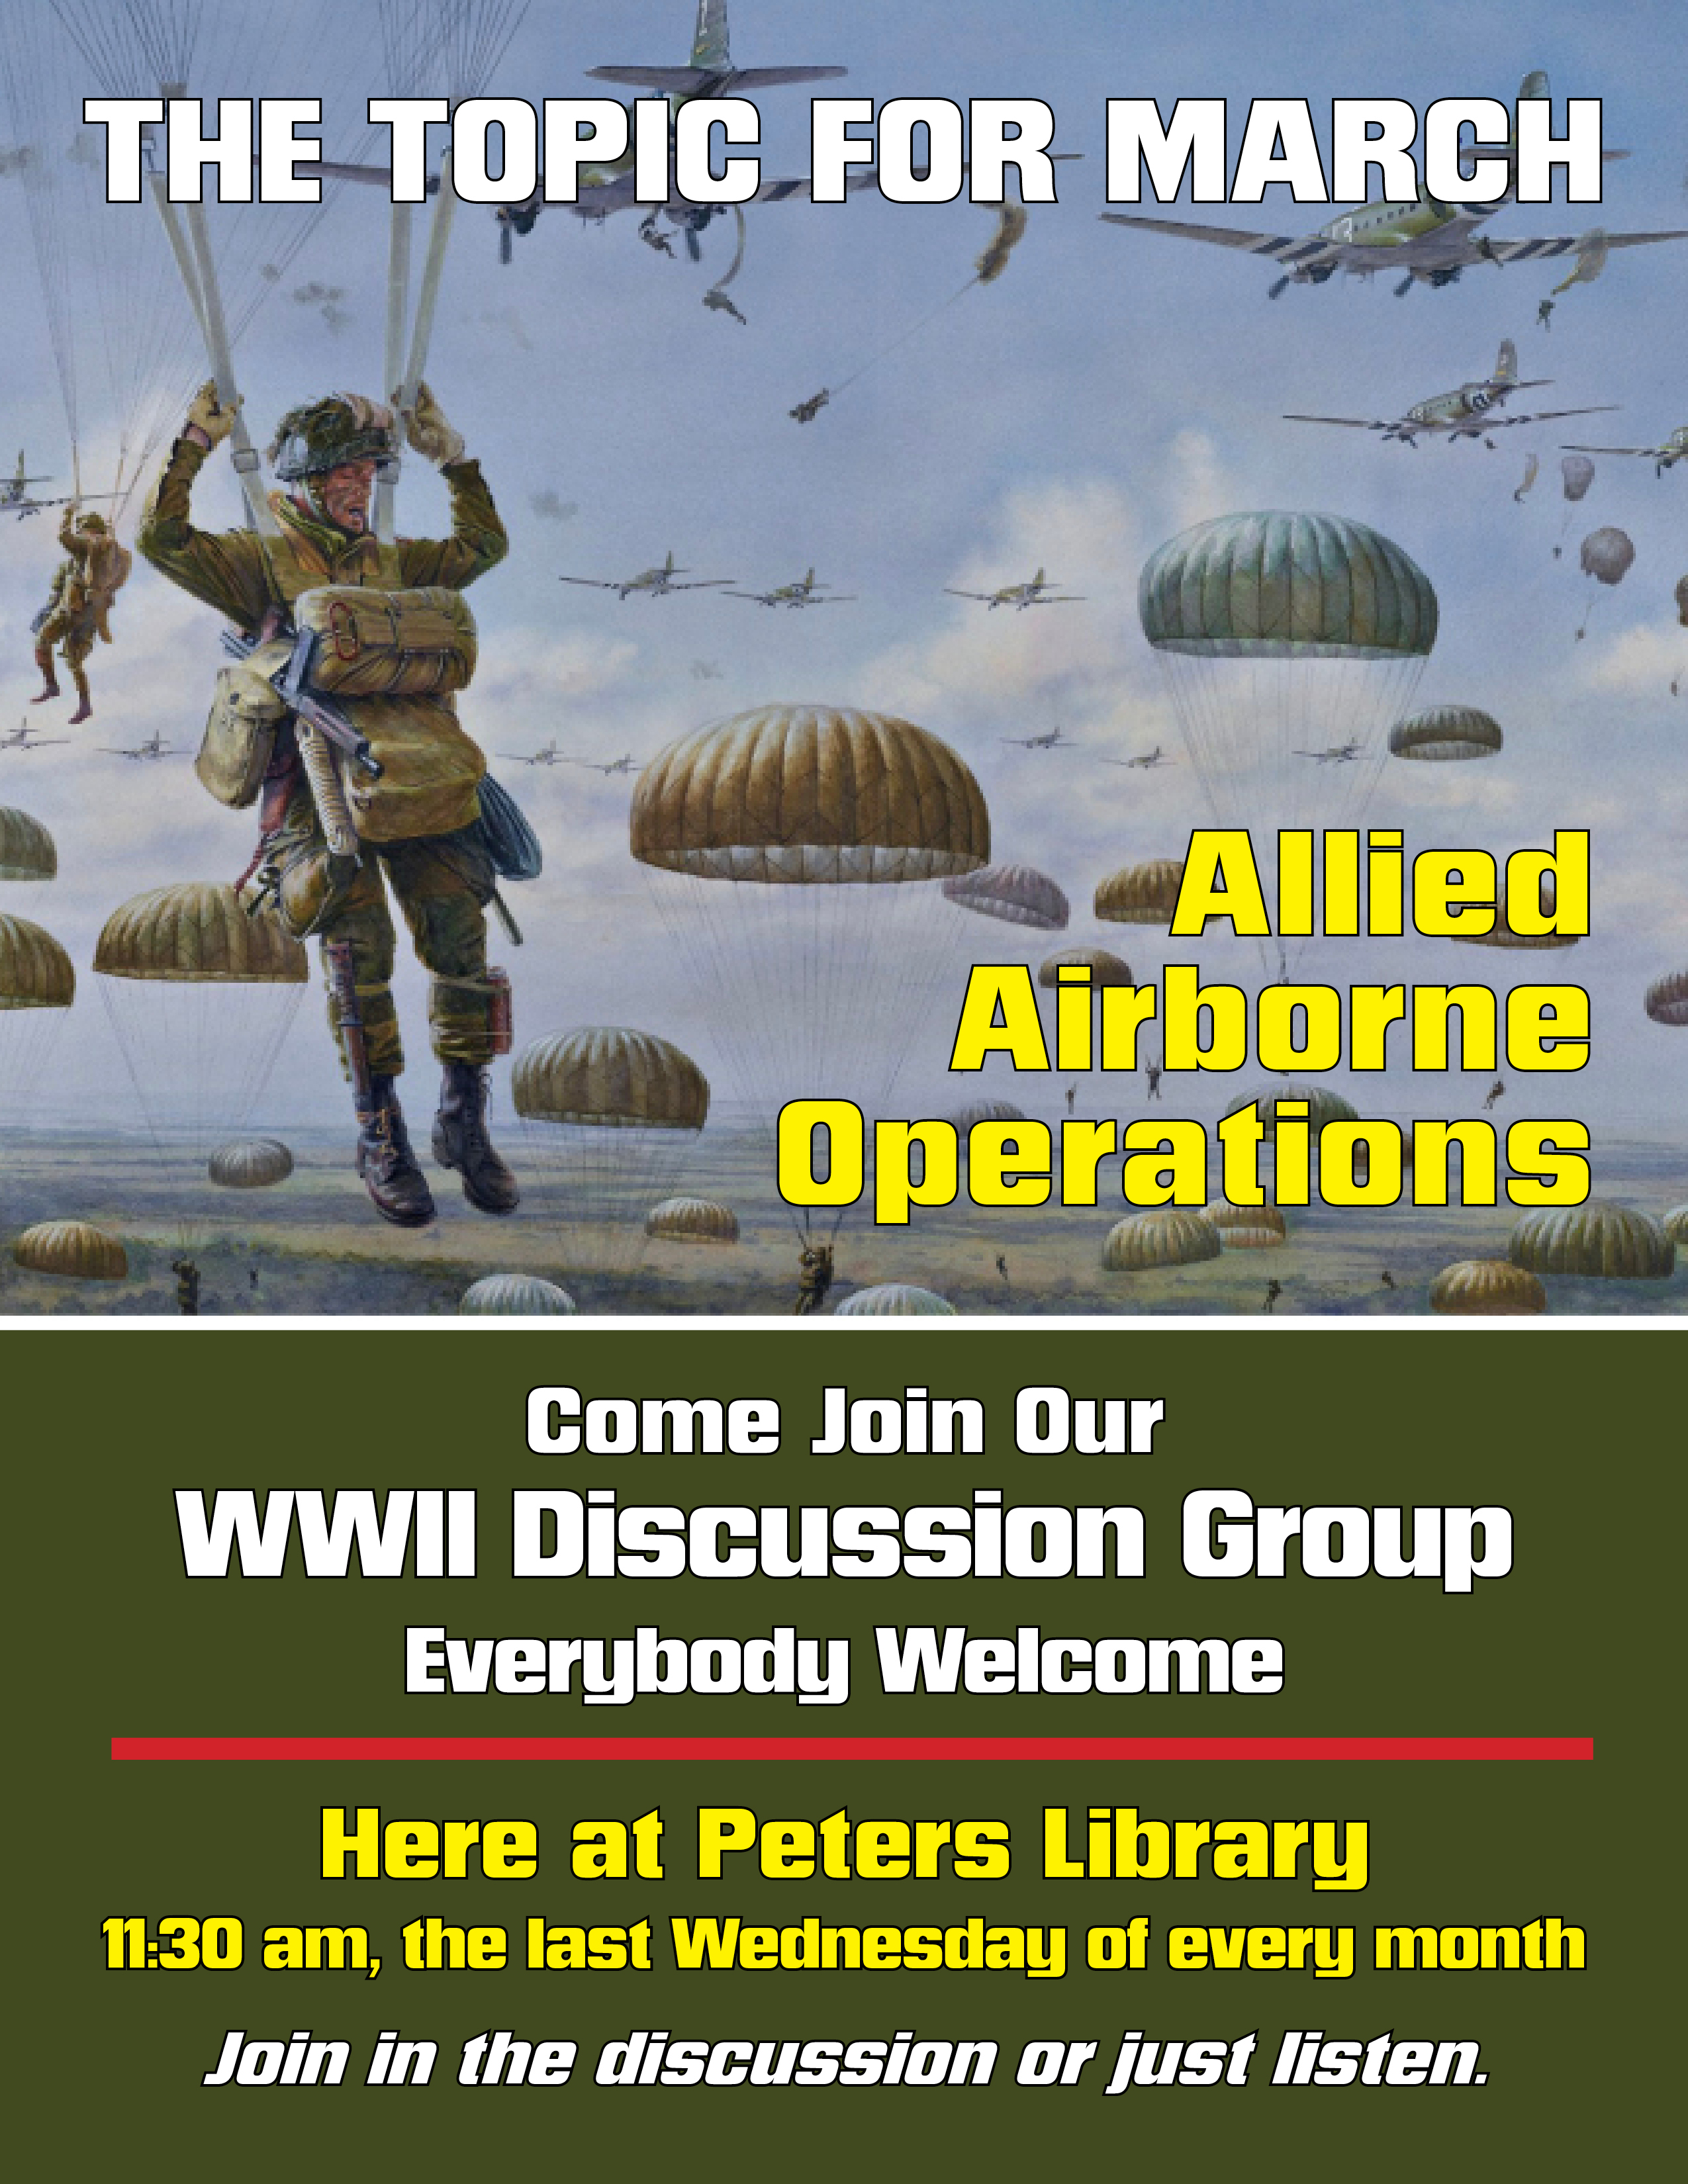 March Topic: Allied Airborne Operations